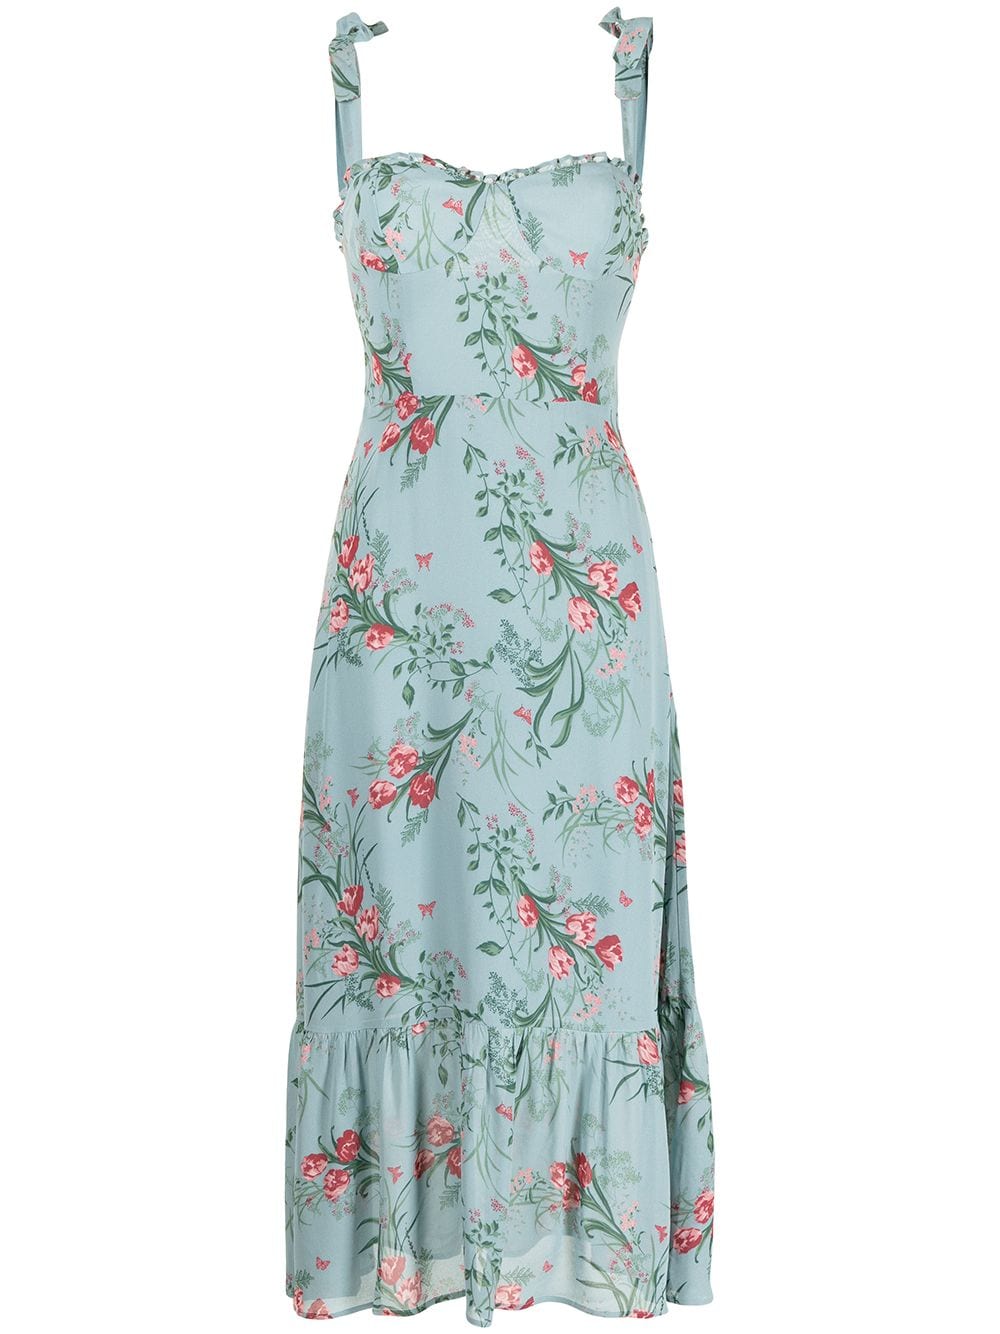 Shop Reformation Nikita floral-print dress with Express Delivery - FARFETCH